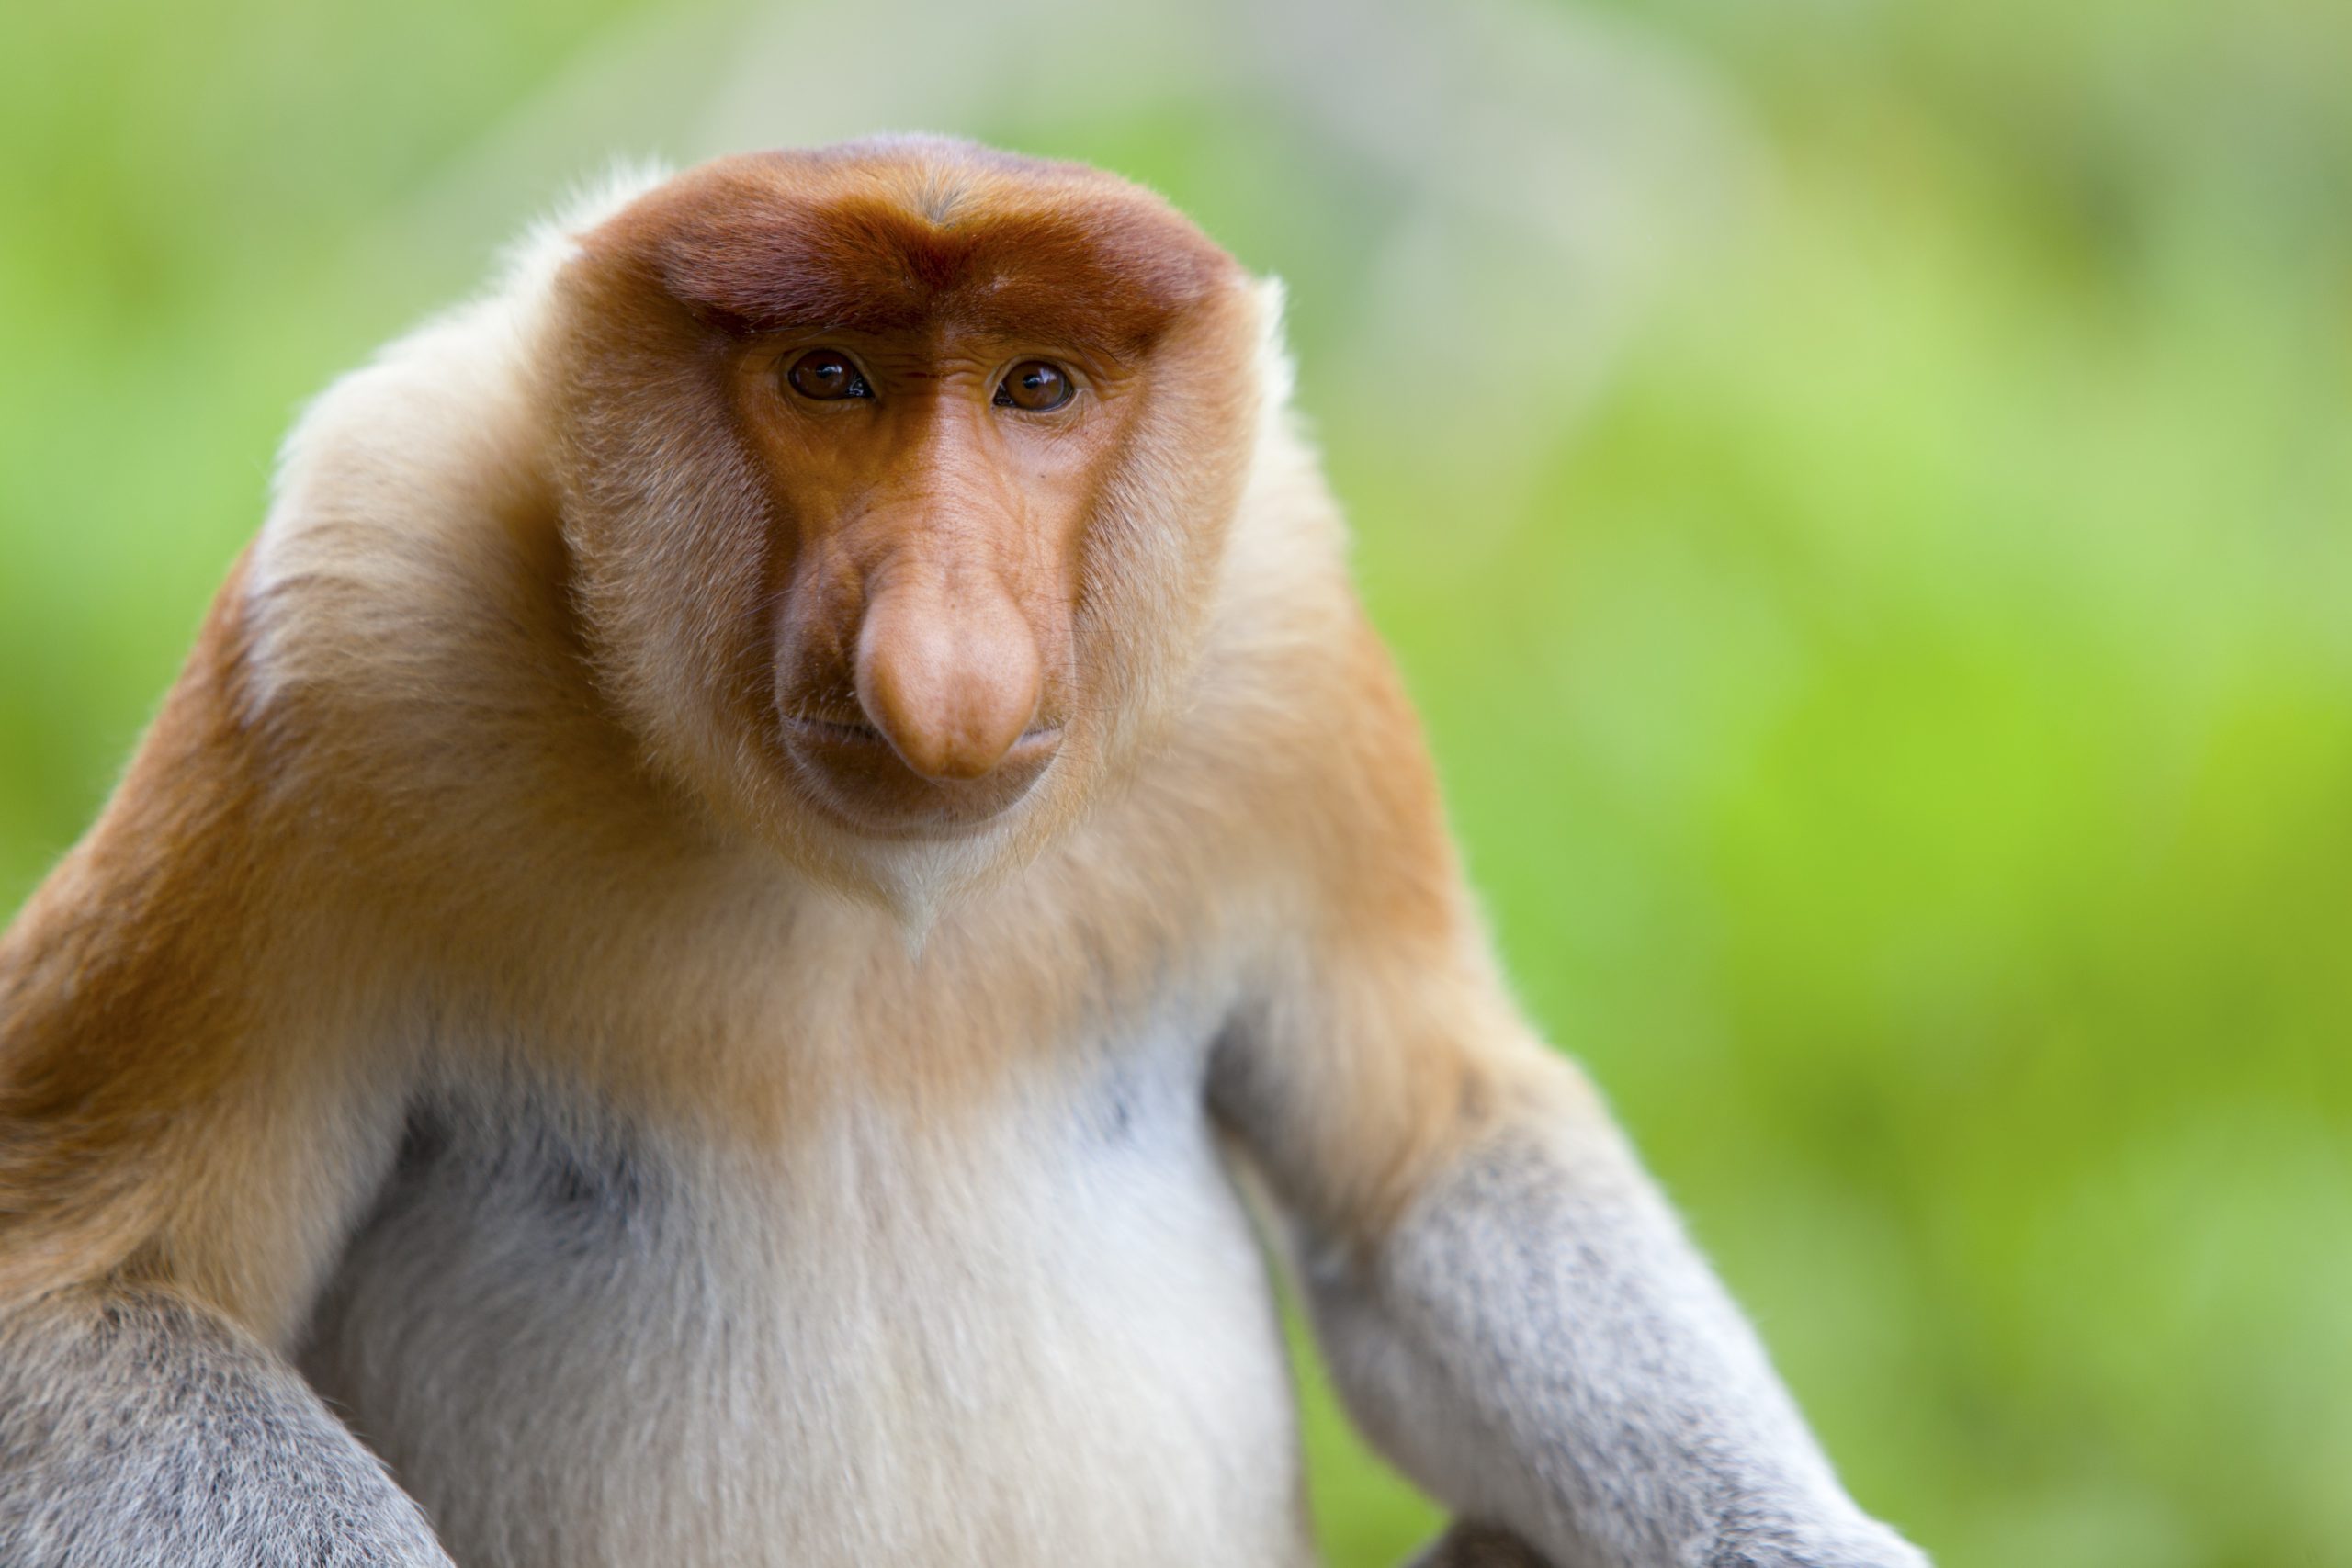 How Many Types of Monkeys Are There in the World?